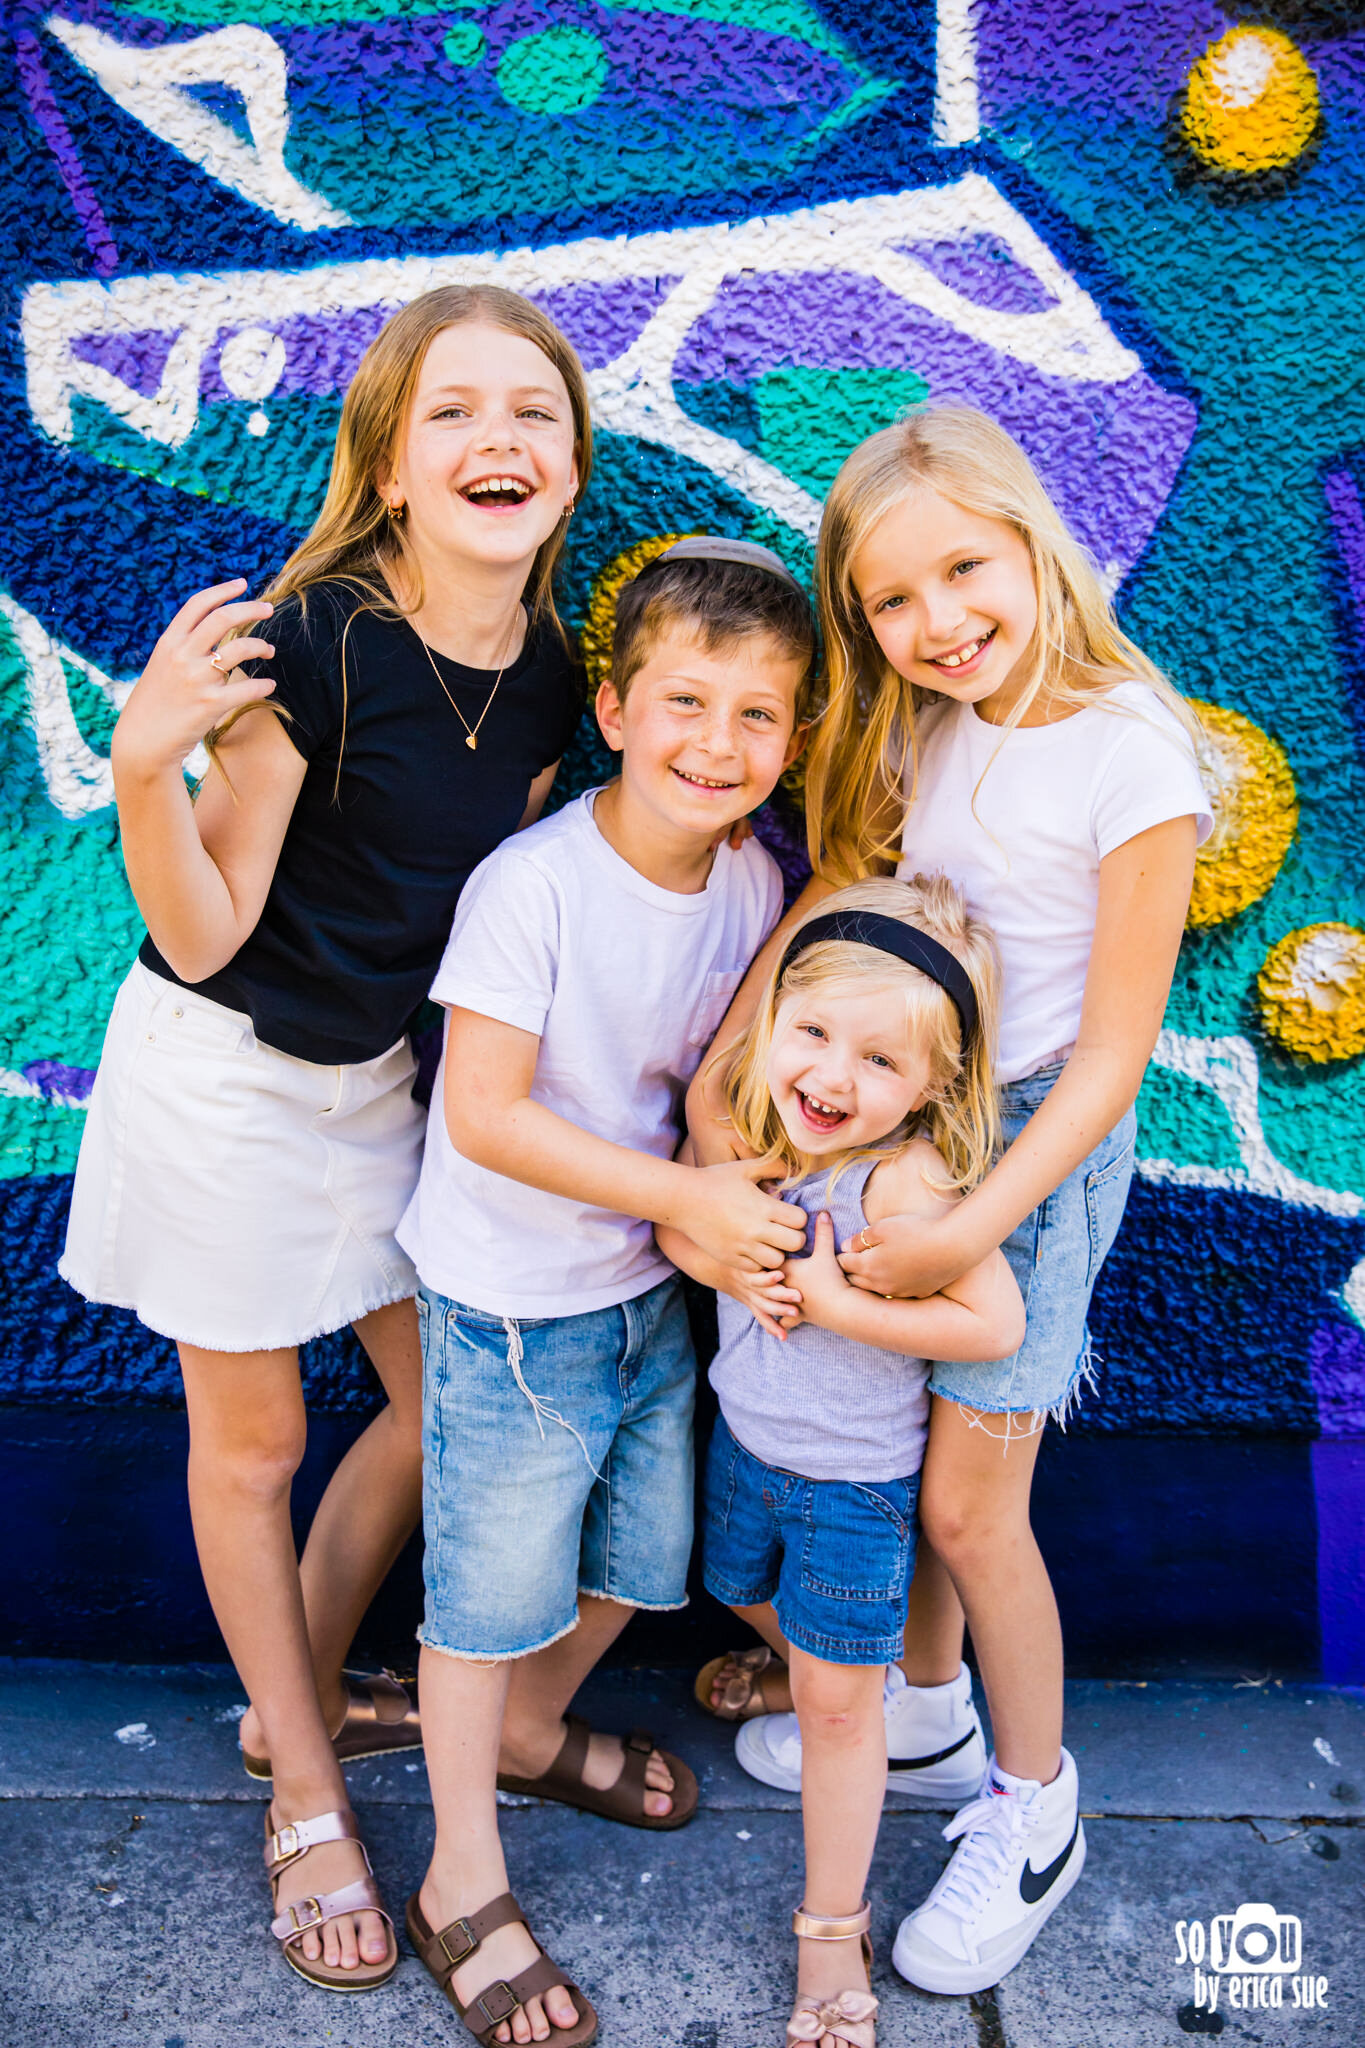 11-so-you-by-erica-sue-extended-family-session-wynwood-lifestyle-photographer-CD8A7275.jpg